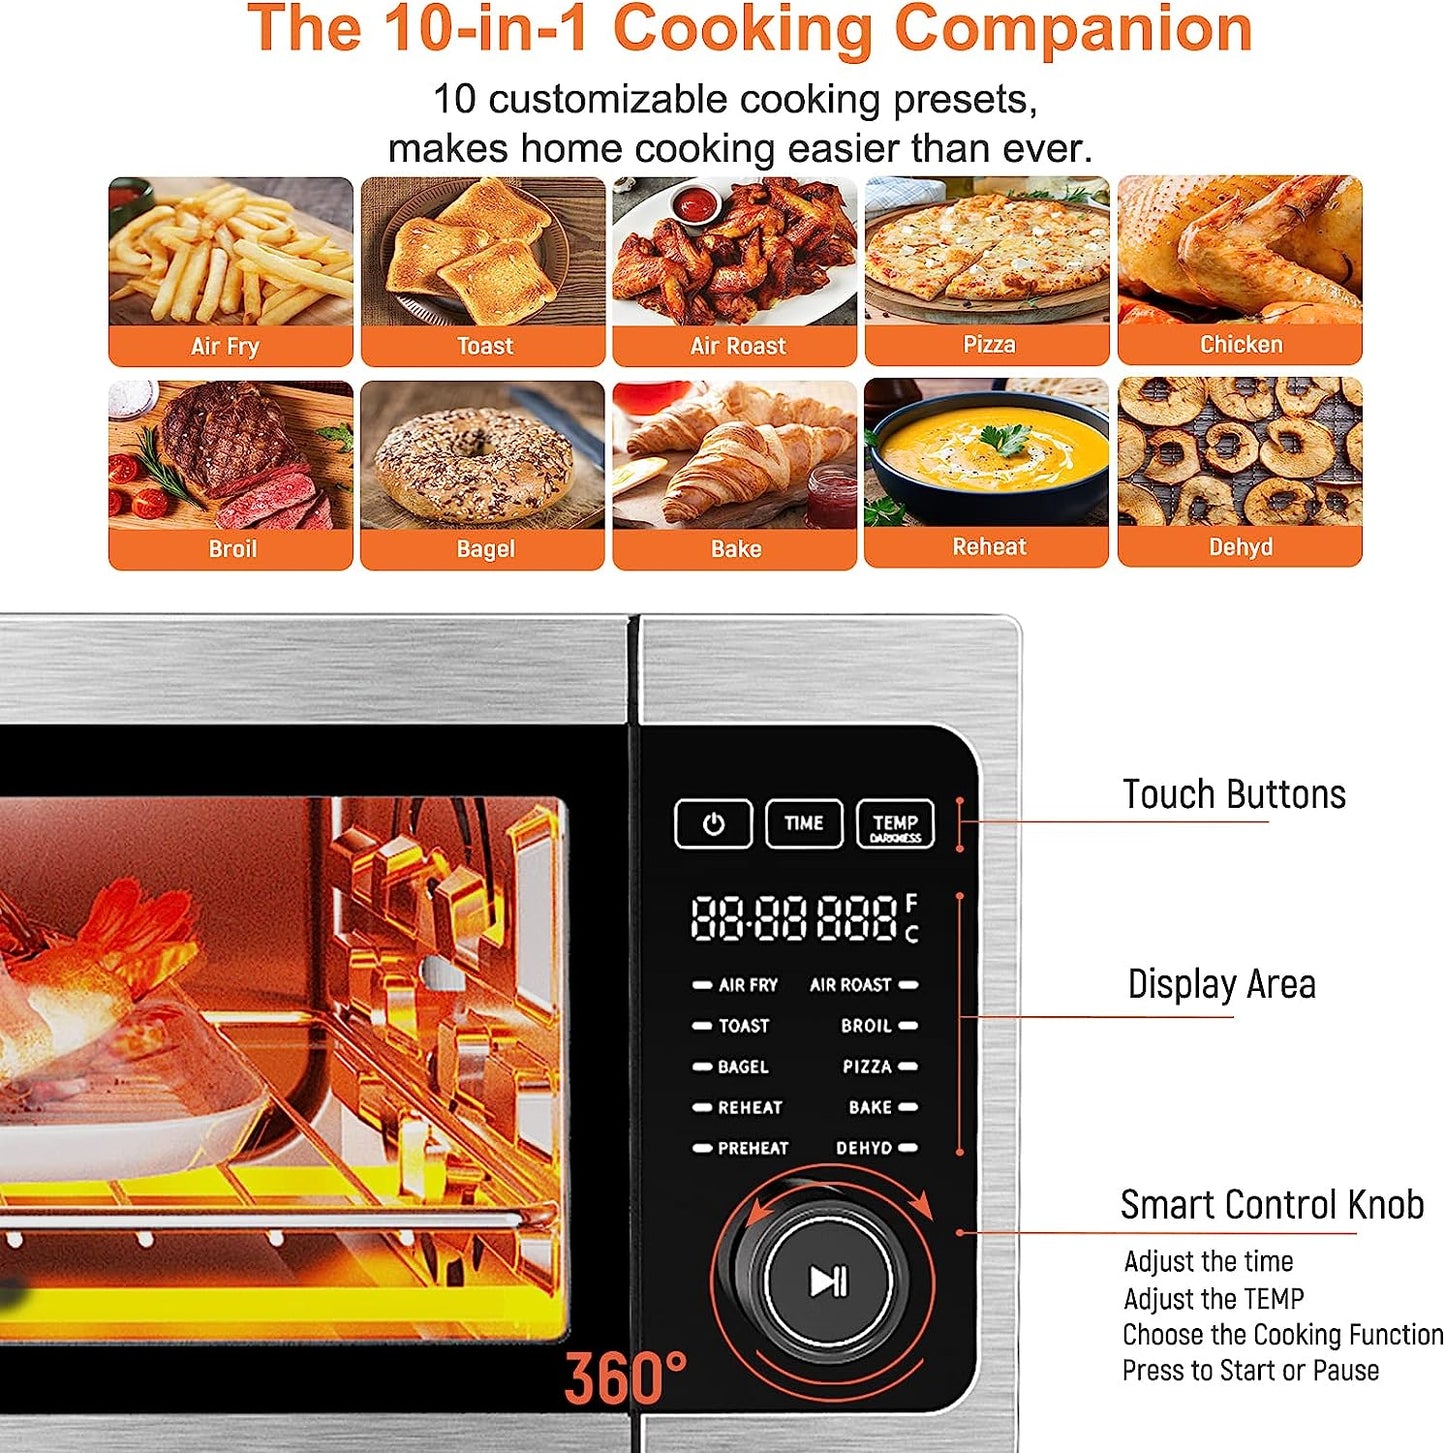 10-In-1 Countertop Convection Oven - Air Fryer Toaster Oven Combo with 1800W Power, Convenient Flip up & Away Design for Space Saving, Oil-Less Cooking, Fits 12" Pizza, Toasts 9 Slices, and Includes 5 Essential Accessories